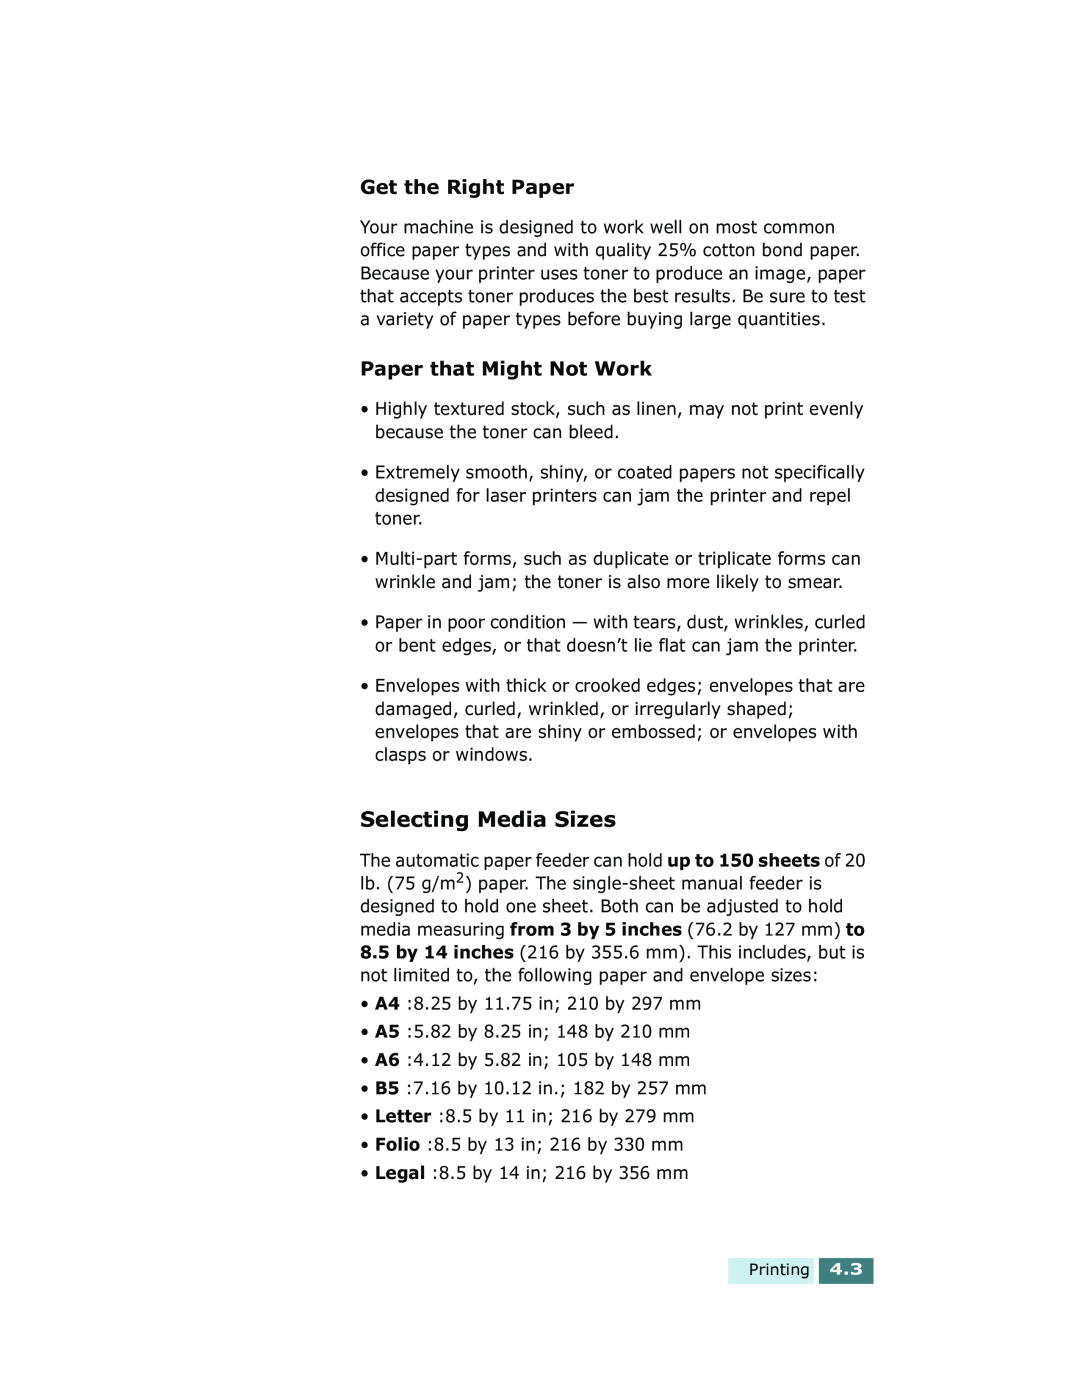 Xerox Pro 580 manual Selecting Media Sizes, Get the Right Paper, Paper that Might Not Work 